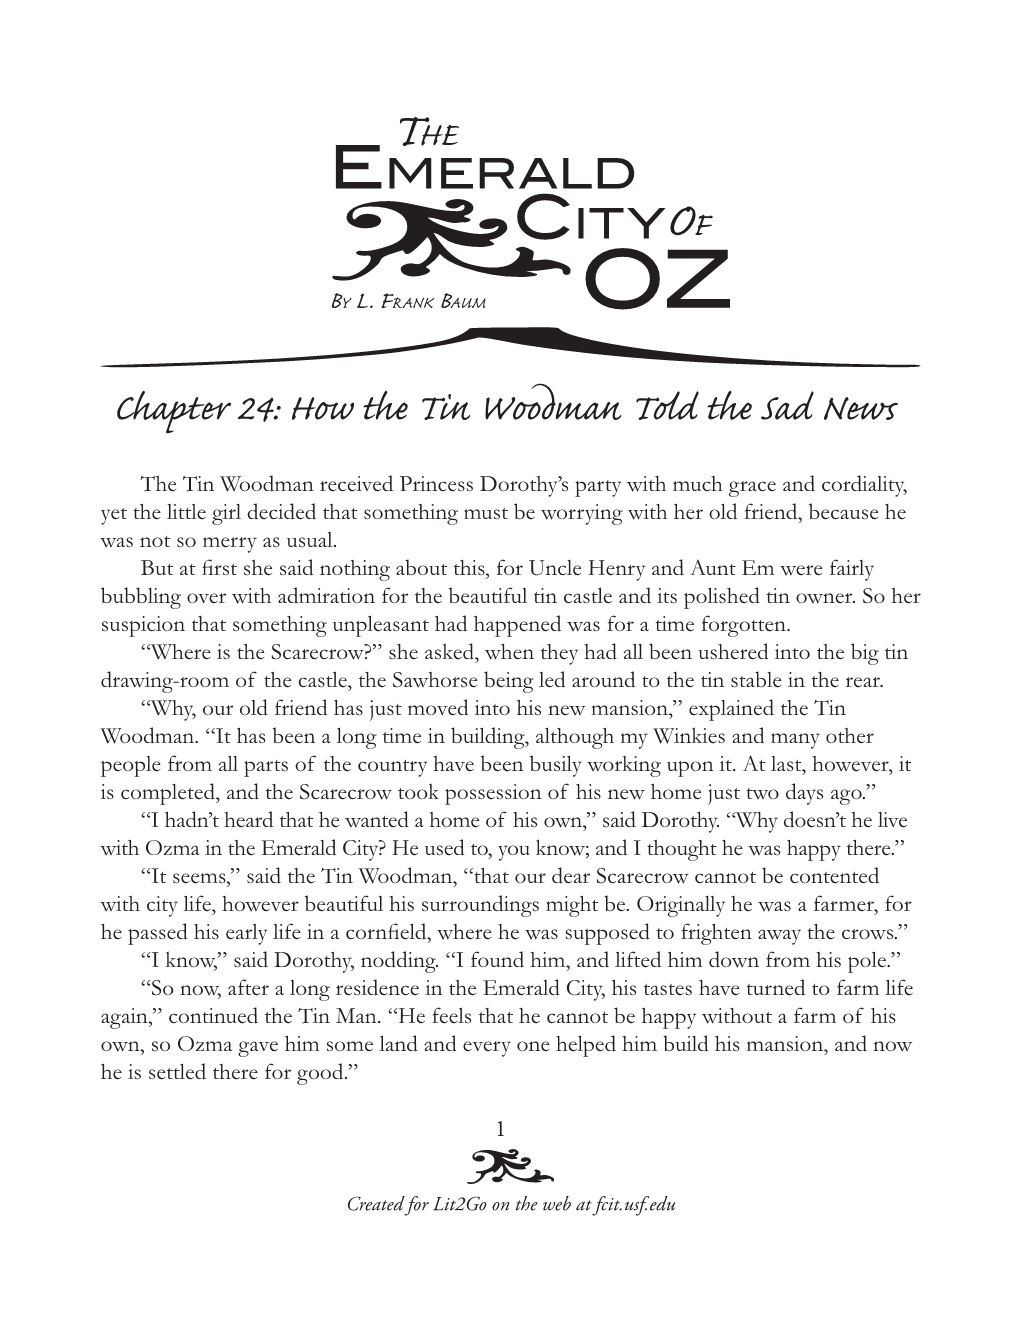 Chapter 24: How the Tin Woodman Told the Sad News